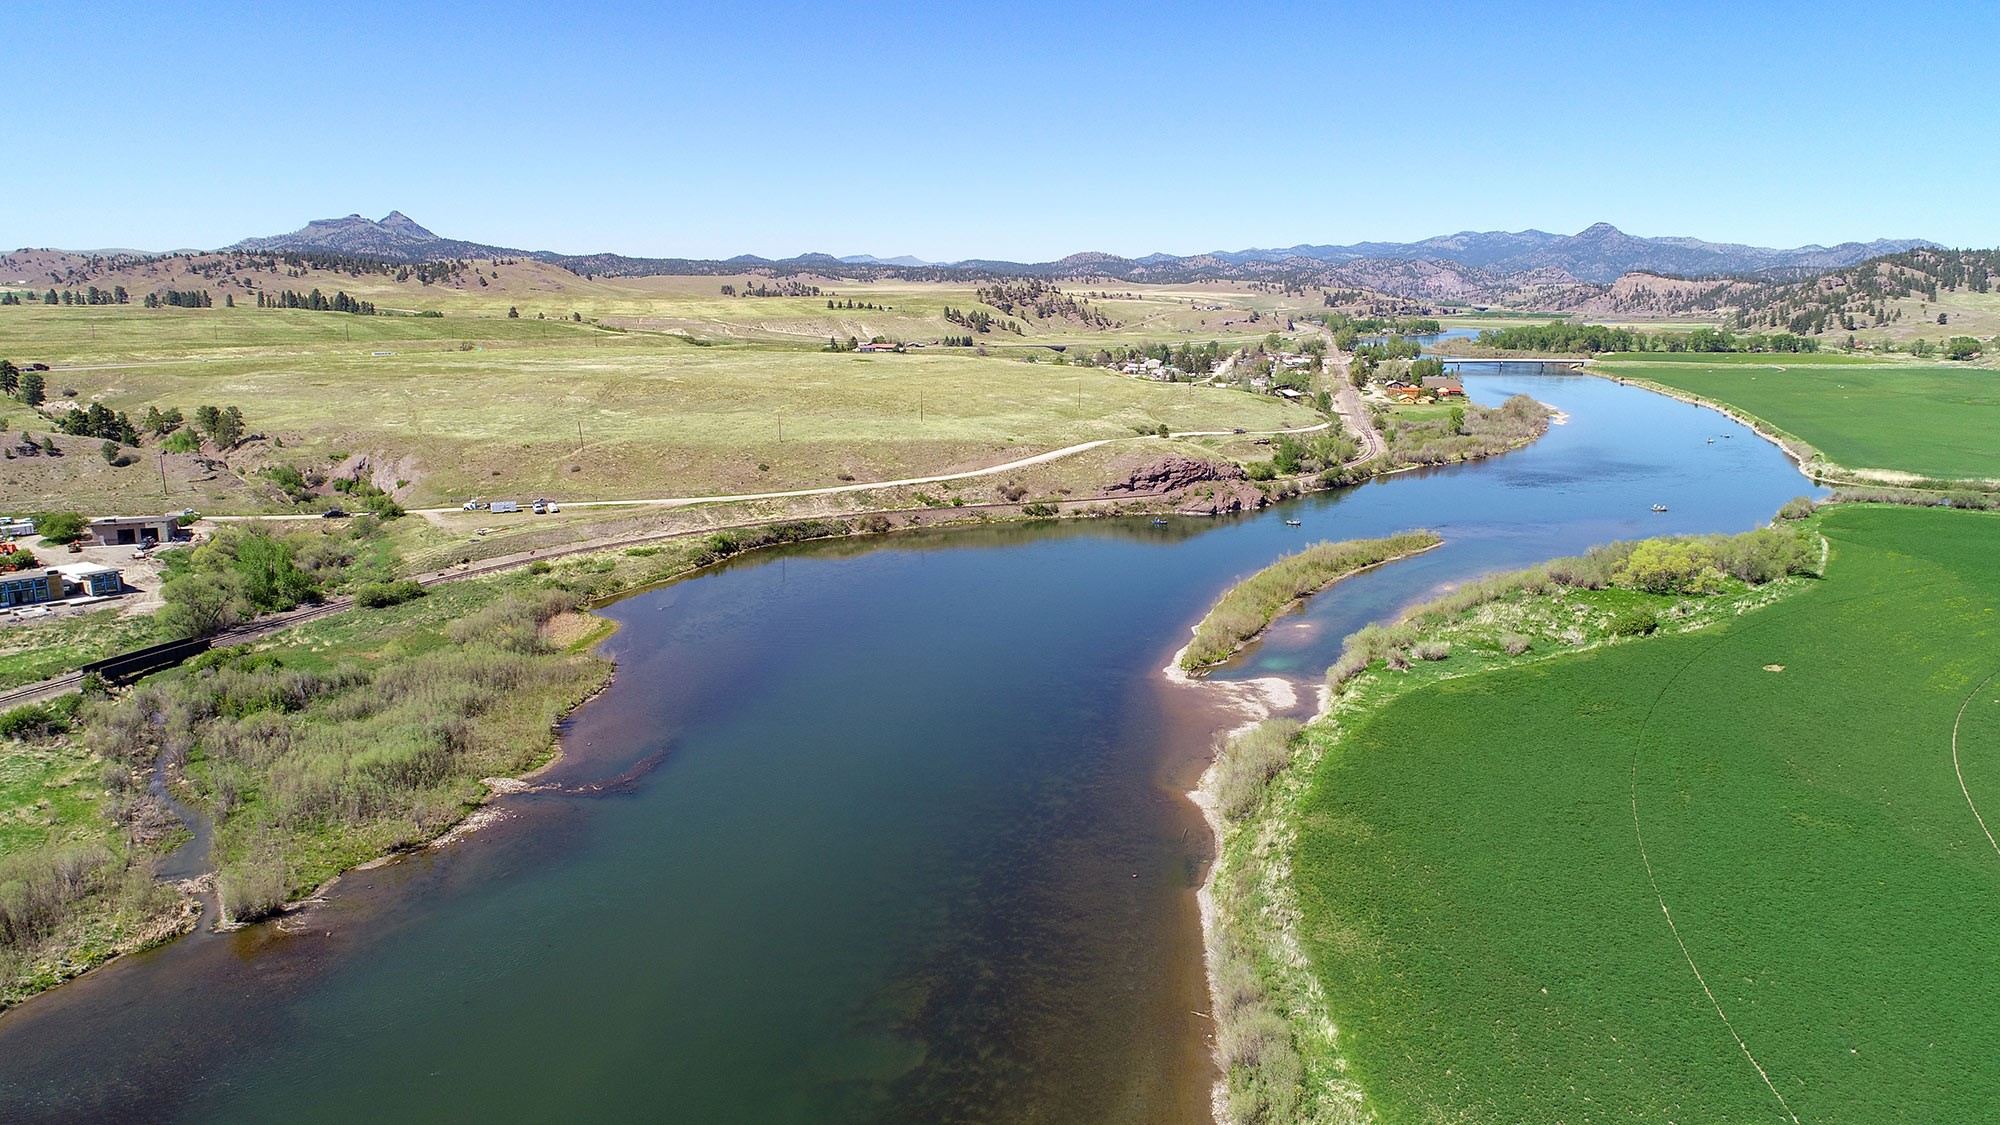 Invest in a hard-to-come-by 14 acres in the fly fishing destination Craig, Montana. The acreage offers phenomenal Missouri River and canyon views and is just off the paved Craig River Road with close proximity to town and services. The acreage is unique because it is divided by the road, so you have acreage almost ON the river with the bulk of the acreage on the hill above.  Let your imagination go wild with uses since there is NO ZONING and Craig is not an incorporated city, so no strict city rules. Build multiple houses on each lot? Take advantage of the high visibility above the river and build a commercial entity? Survey allows for single-family, but county says that a DEQ re-write not an issue. Septic was previously approved. Call Lynn Kenyon at 406-770-0013 or your real estate professional. Build your dream home on one side and use the other side for commercial. The possibilities are really endless and the traffic to Craig is brisk. Buyer to confirm all uses with county and state planning and health departments. Craig brings in thousands to fly fish and float on the river and recreate at nearby Holter Lake. Craig is nearly half way between Helena and Great Falls, so commutable. Buyers to verify all representations to their own satisfaction.